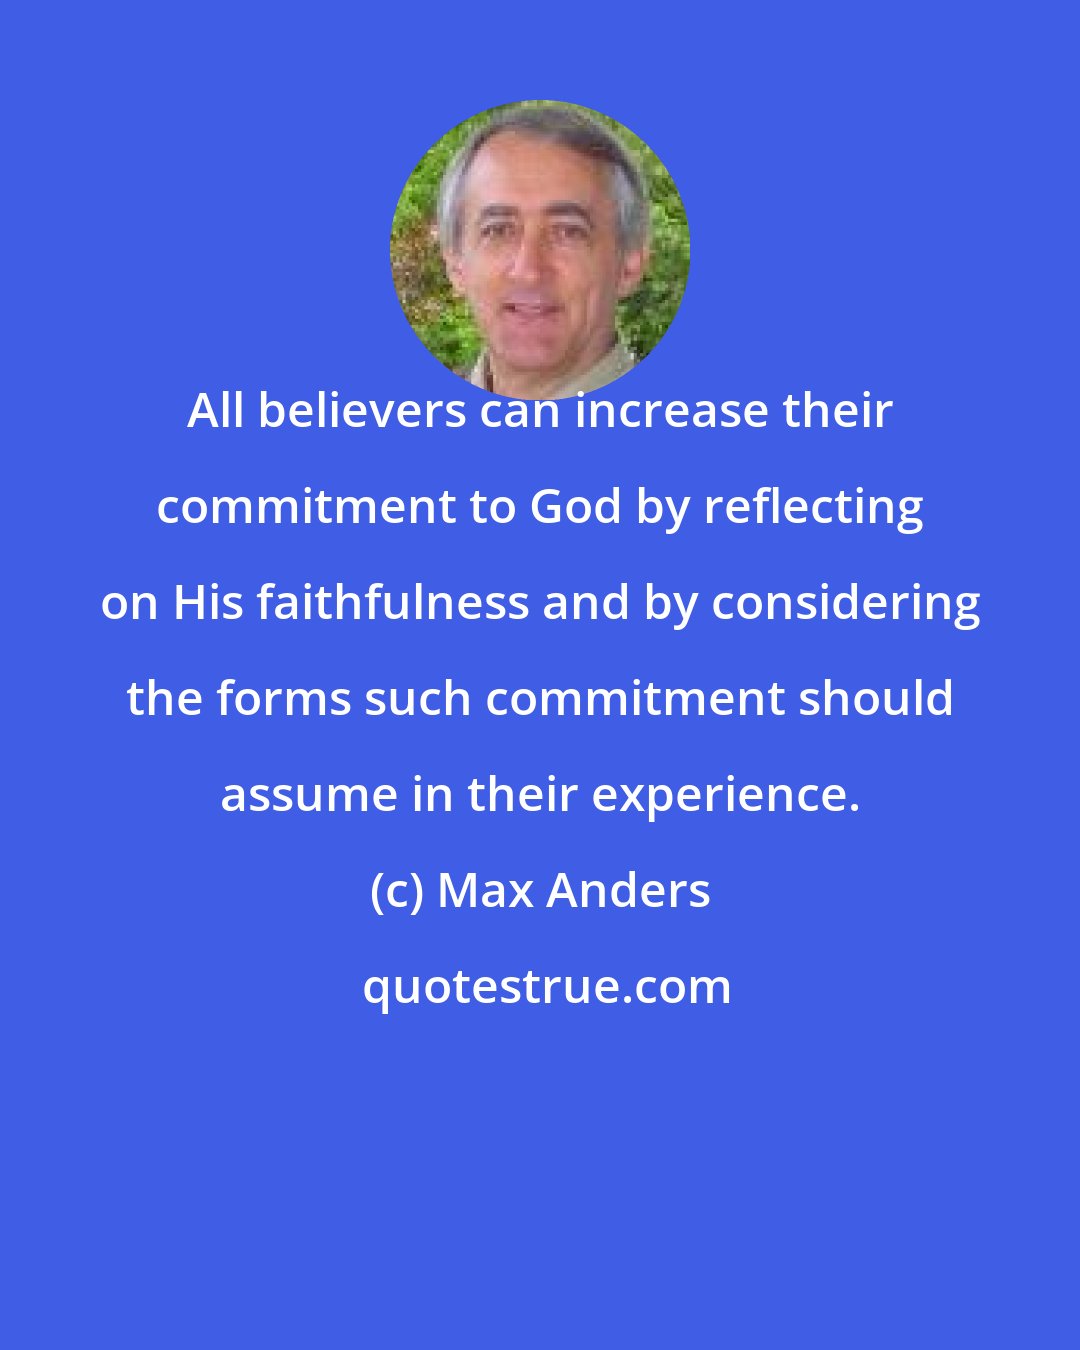 Max Anders: All believers can increase their commitment to God by reflecting on His faithfulness and by considering the forms such commitment should assume in their experience.